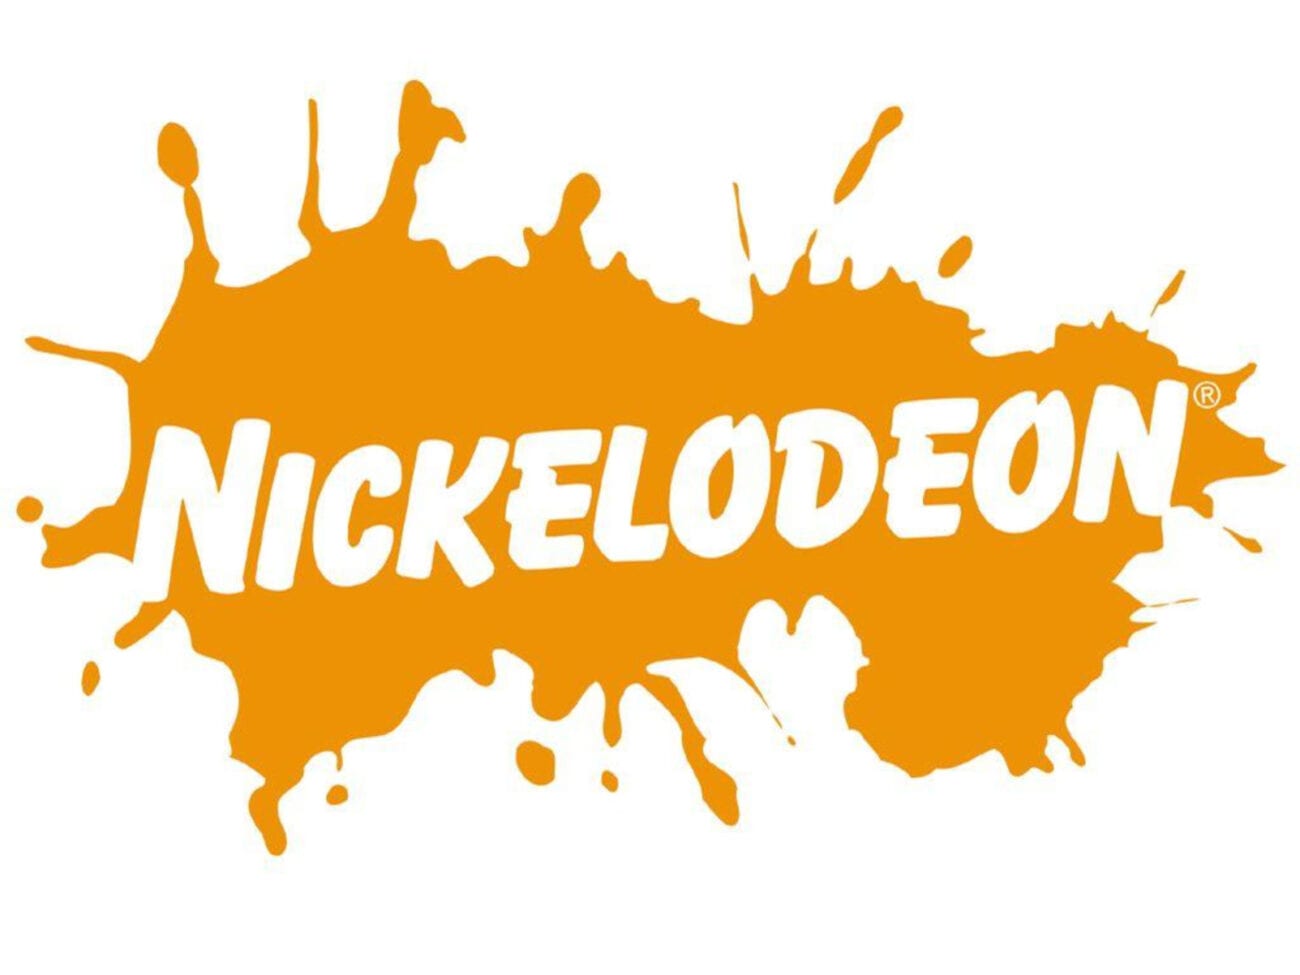 There's a huge swell of new Nickelodeon content coming to Paramount Plus soon. Find out which Nickelodeon cartoons are getting a live-action reboot.